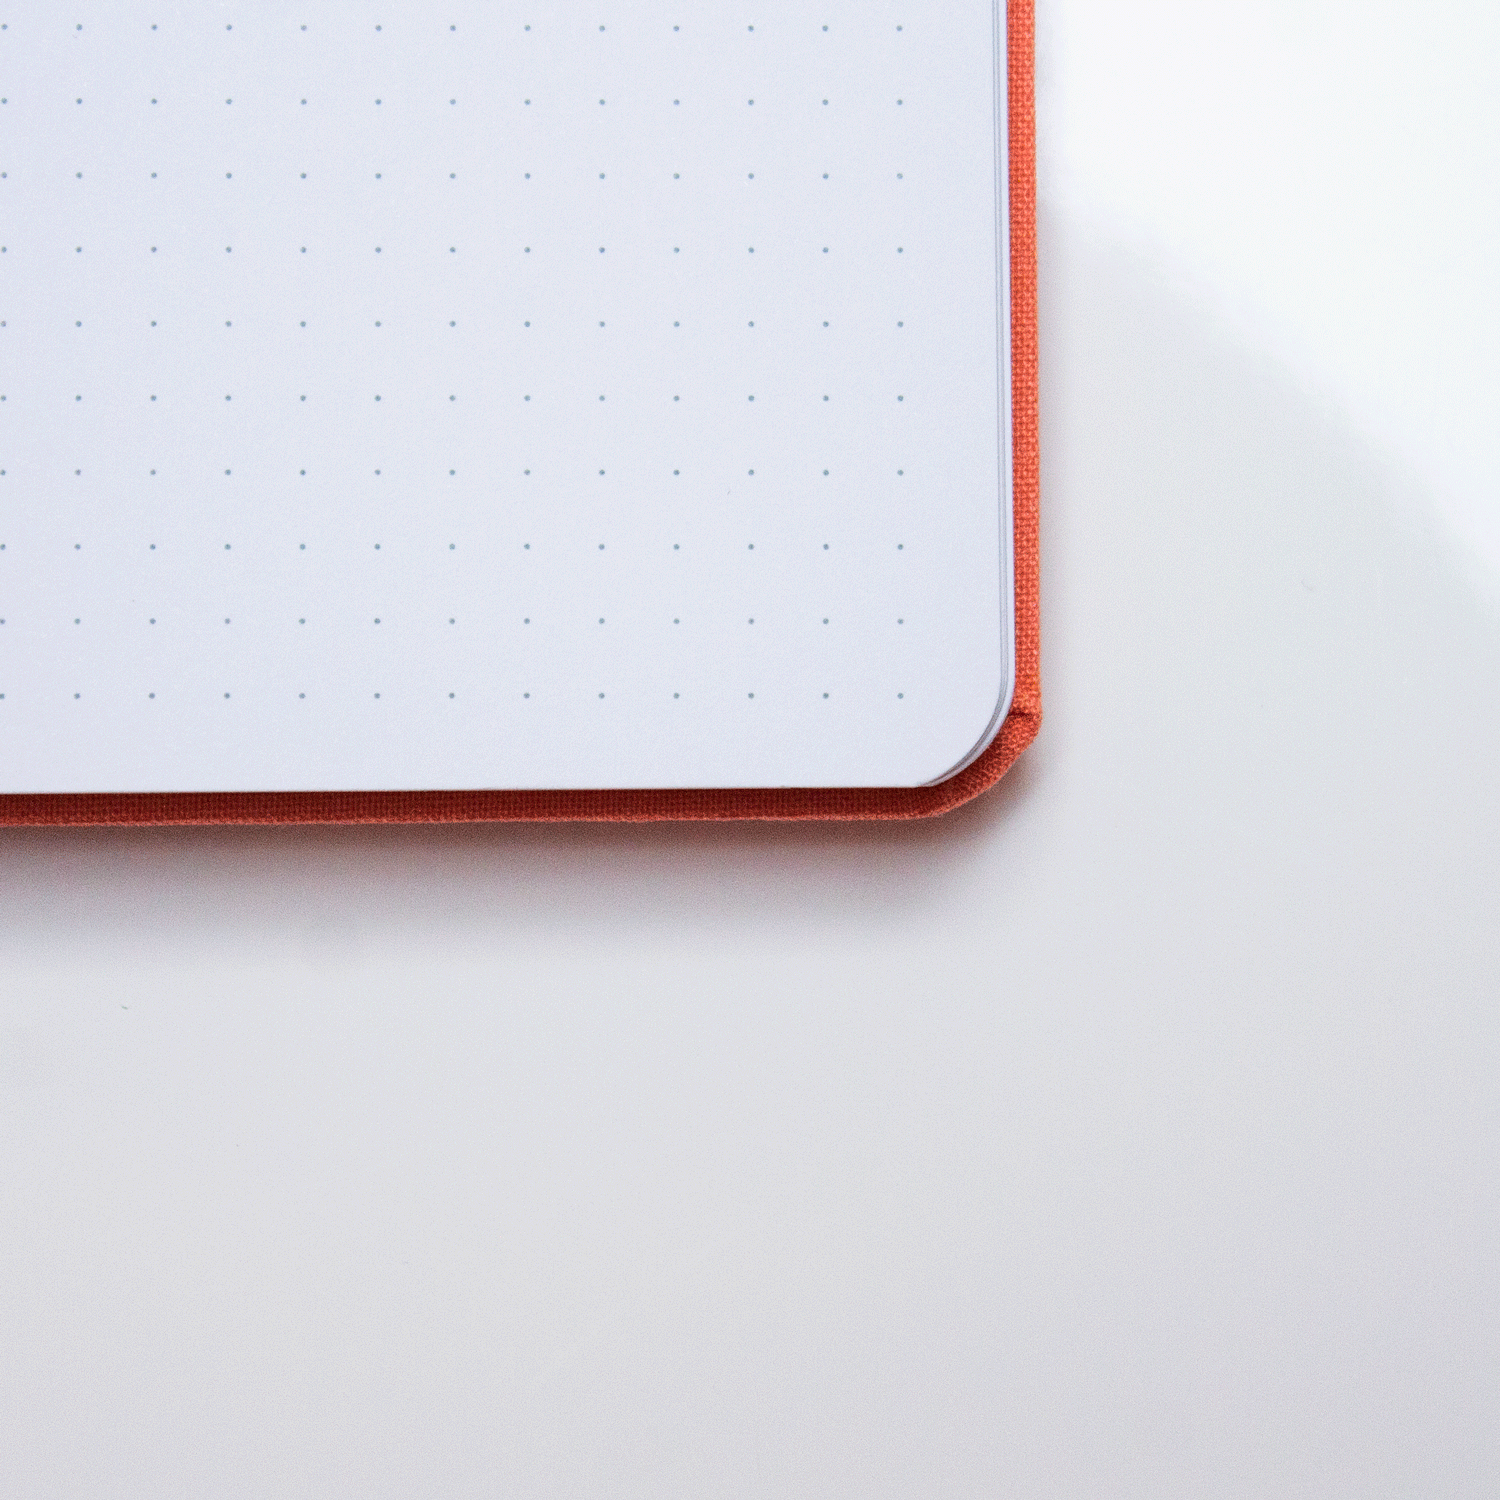 A close up of the Tangerine bobo BuJo dot grid journal opened to show the white dot grid paper.